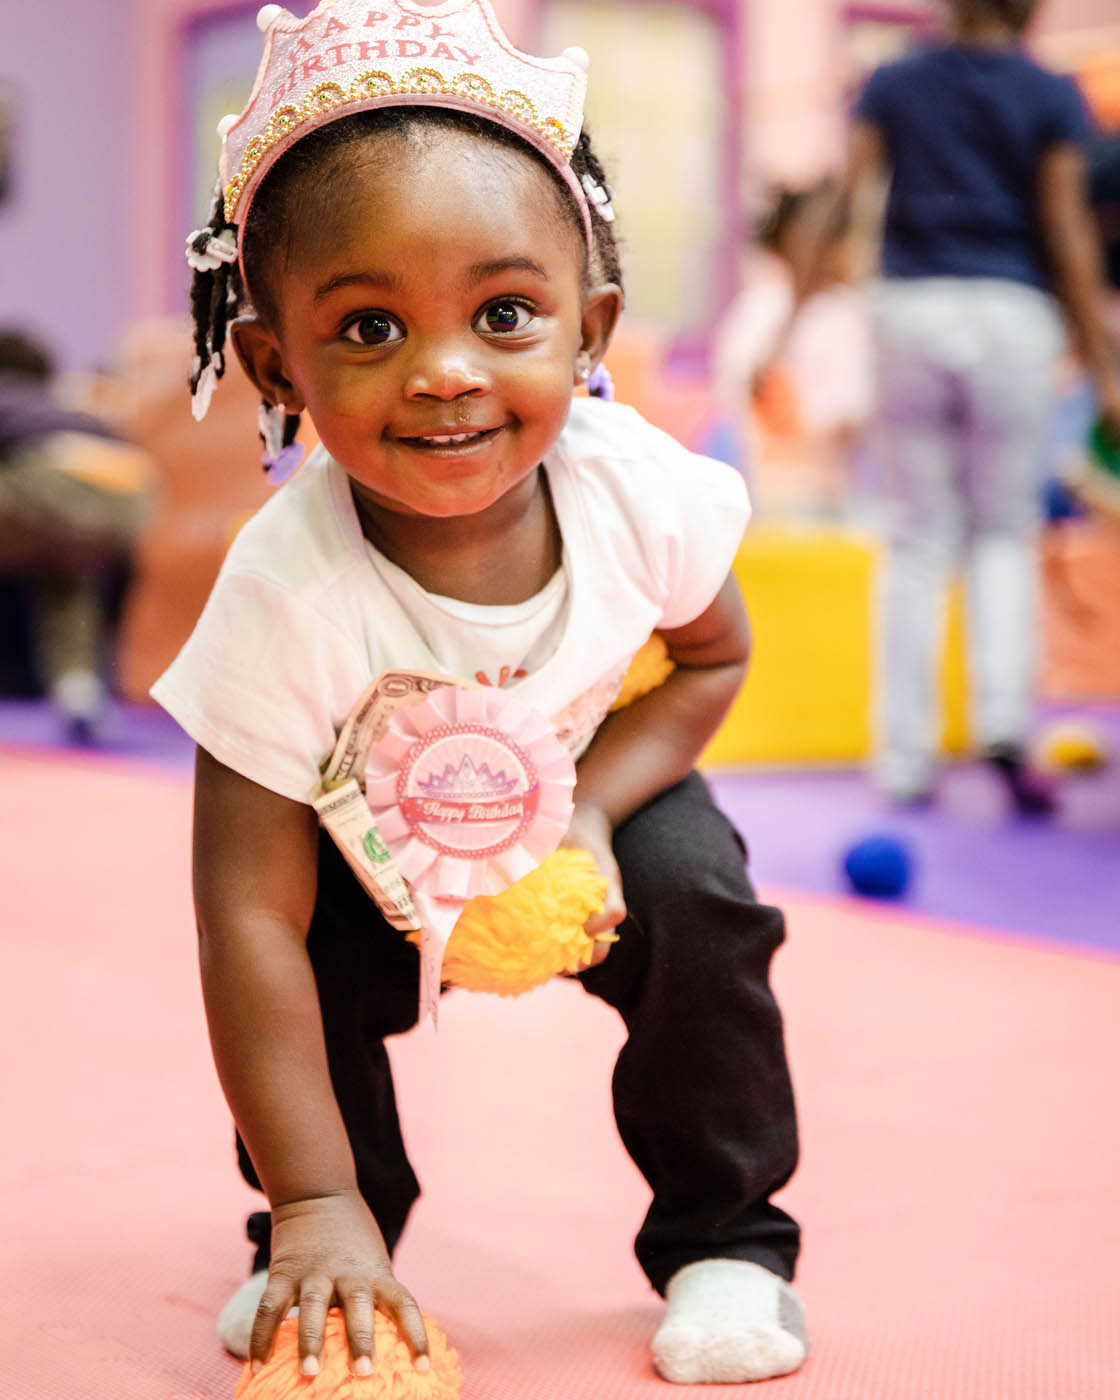 A toddler in a white shirt smiling at the camera, contact us today for toddler activities in St. Petersburg.